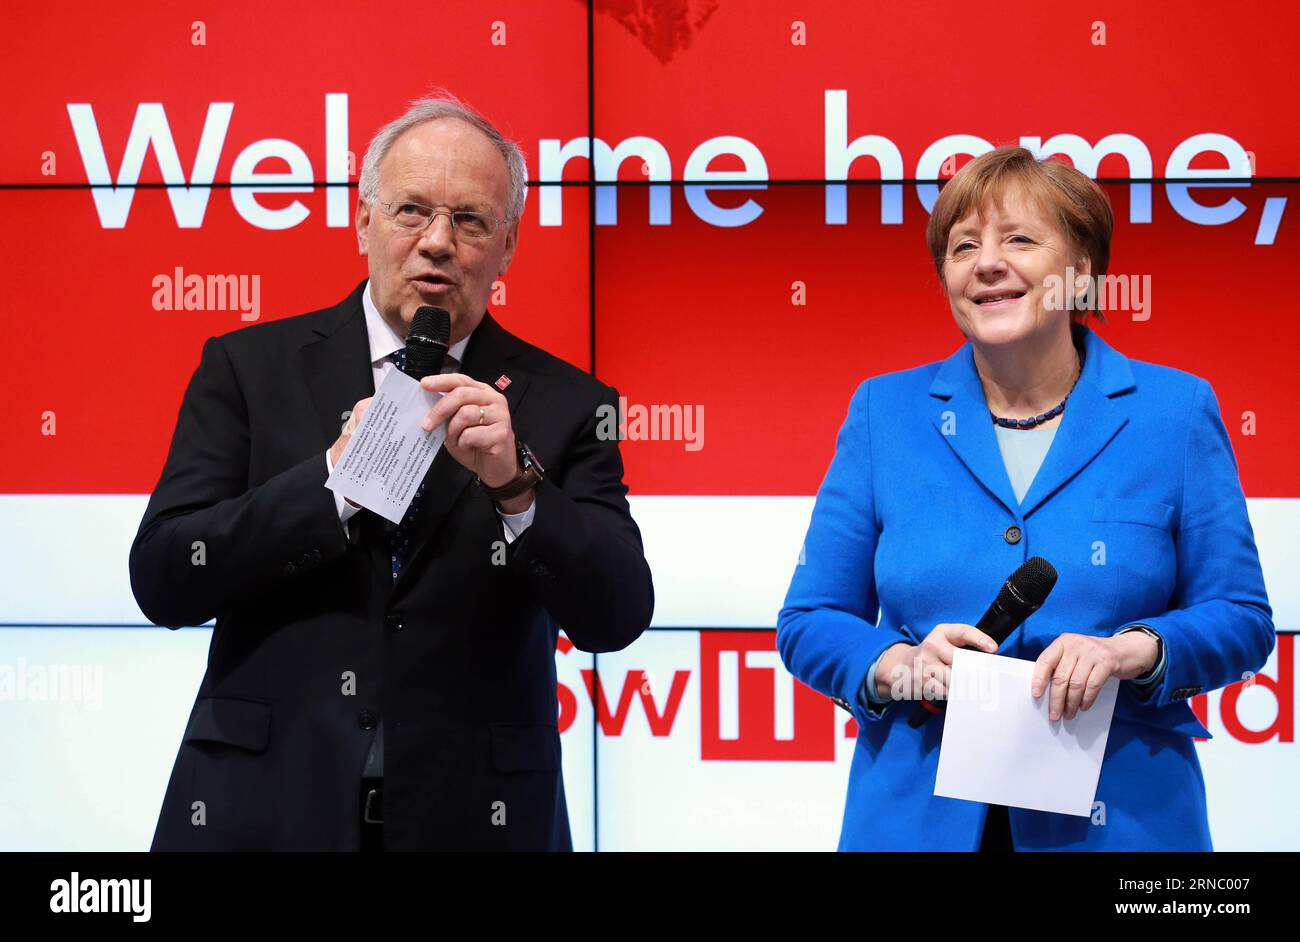 (160315) -- HANOVER, March 15, 2016 -- German chancellor Angela Merkel (R) and Swiss President Johann Schneider-Ammann visit the CeBIT 2016 in Hanover, central Germany, on March 15, 2016. Switzerland is the partner country of the CeBIT 2016. ) GERMANY-HANOVER-CEBIT-SWITZERLAND LuoxHuanhuan PUBLICATIONxNOTxINxCHN   Hanover March 15 2016 German Chancellor Angela Merkel r and Swiss President Johann Schneider Ammann Visit The CeBit 2016 in Hanover Central Germany ON March 15 2016 Switzerland IS The Partner Country of The CeBit 2016 Germany Hanover CeBit Switzerland LuoxHuanhuan PUBLICATIONxNOTxINx Stock Photo